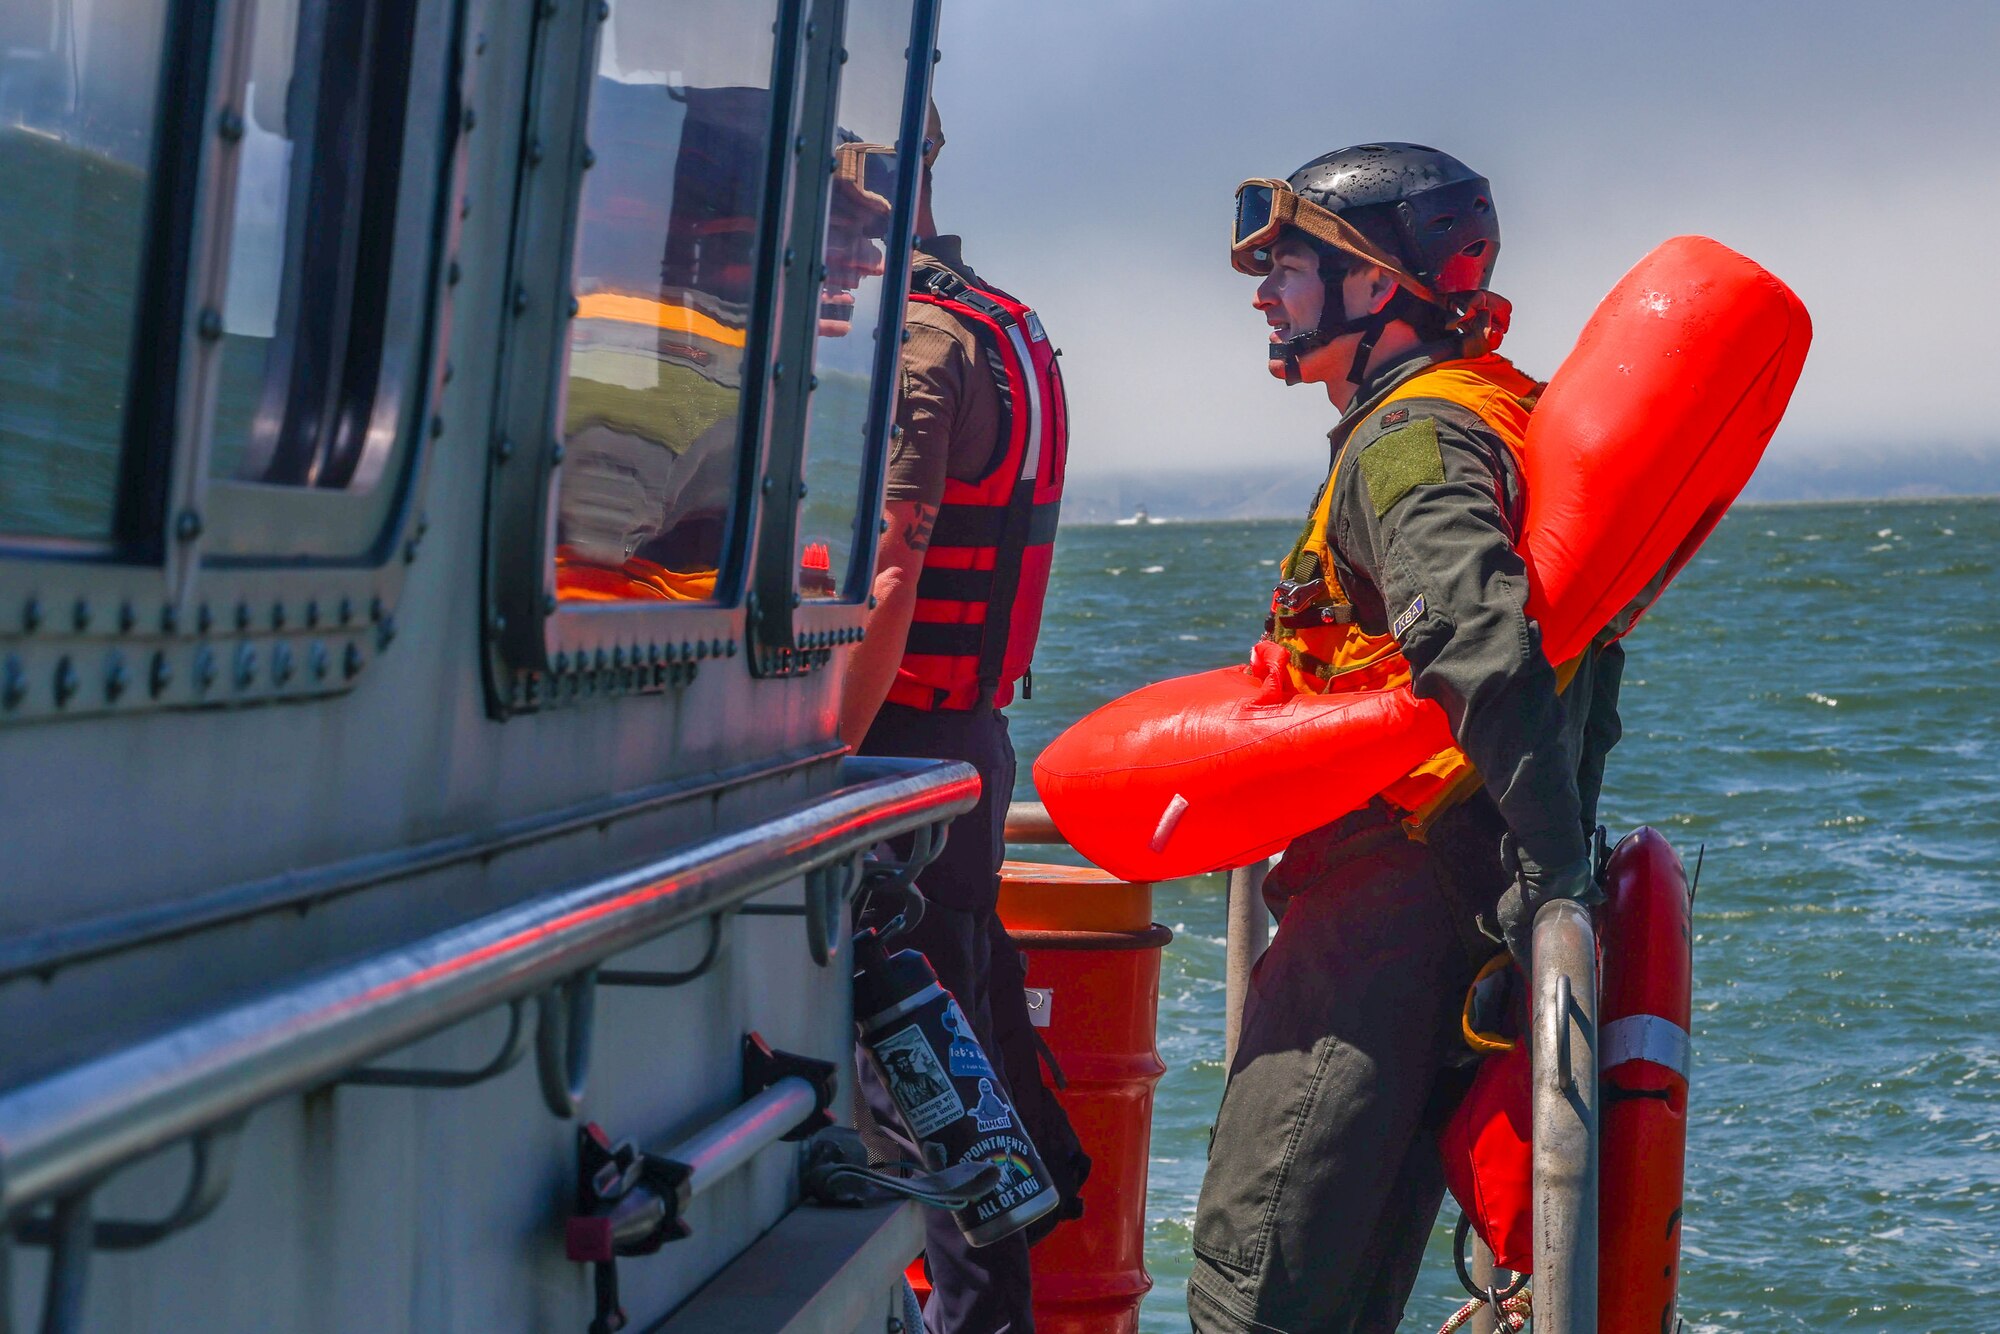 U.S. Air Force Maj. Alexander Jobrack, Flight Doctor, 9th Operational Medical Readiness Squadron, recovers after his section of the Search and Rescue Exercise (SAREX) in the San Francisco Bay, California on Aug. 17, 2023.